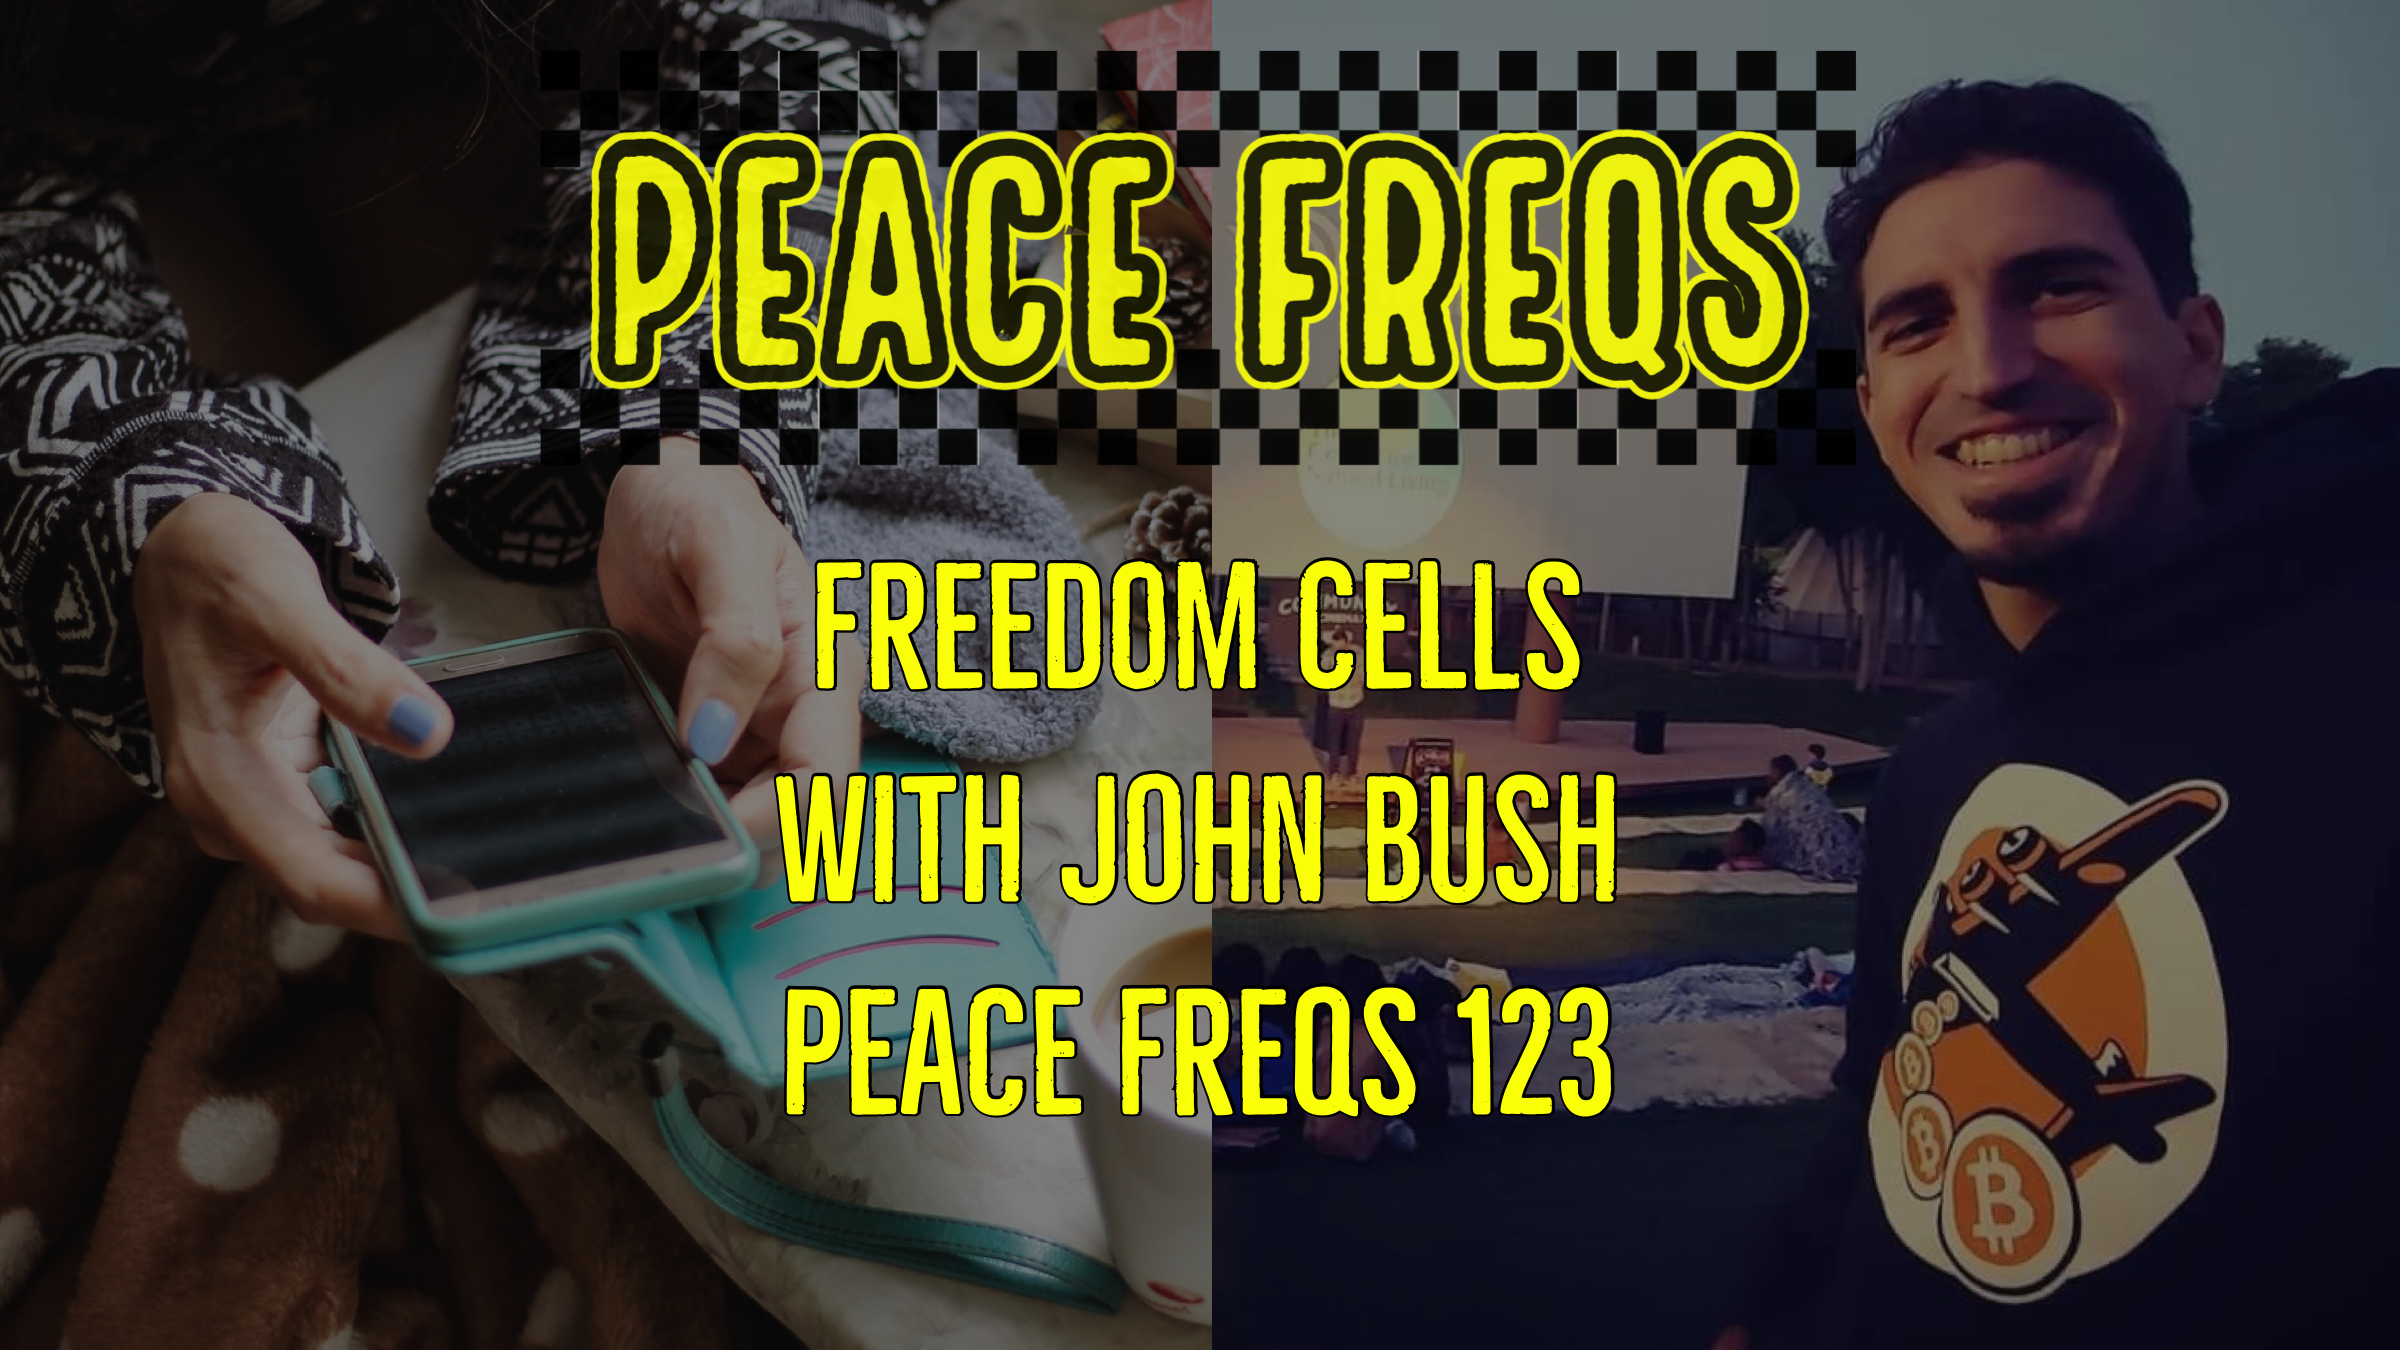 Freedom Cells With John Bush: Tales From The Trenches - Peace Freqs 123 Title Card